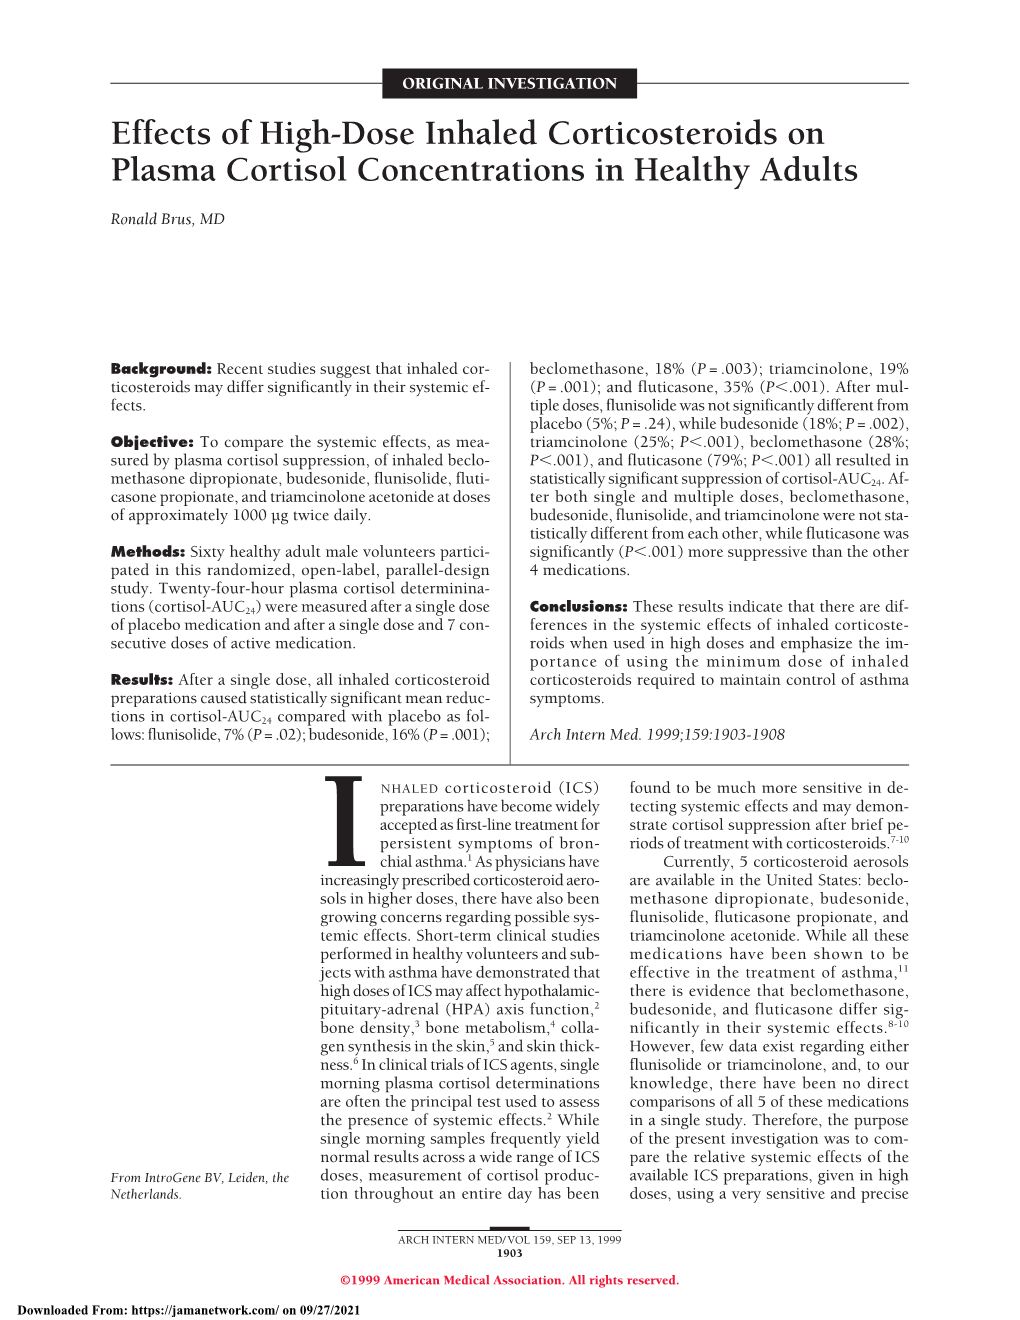 Effects of High-Dose Inhaled Corticosteroids on Plasma Cortisol Concentrations in Healthy Adults